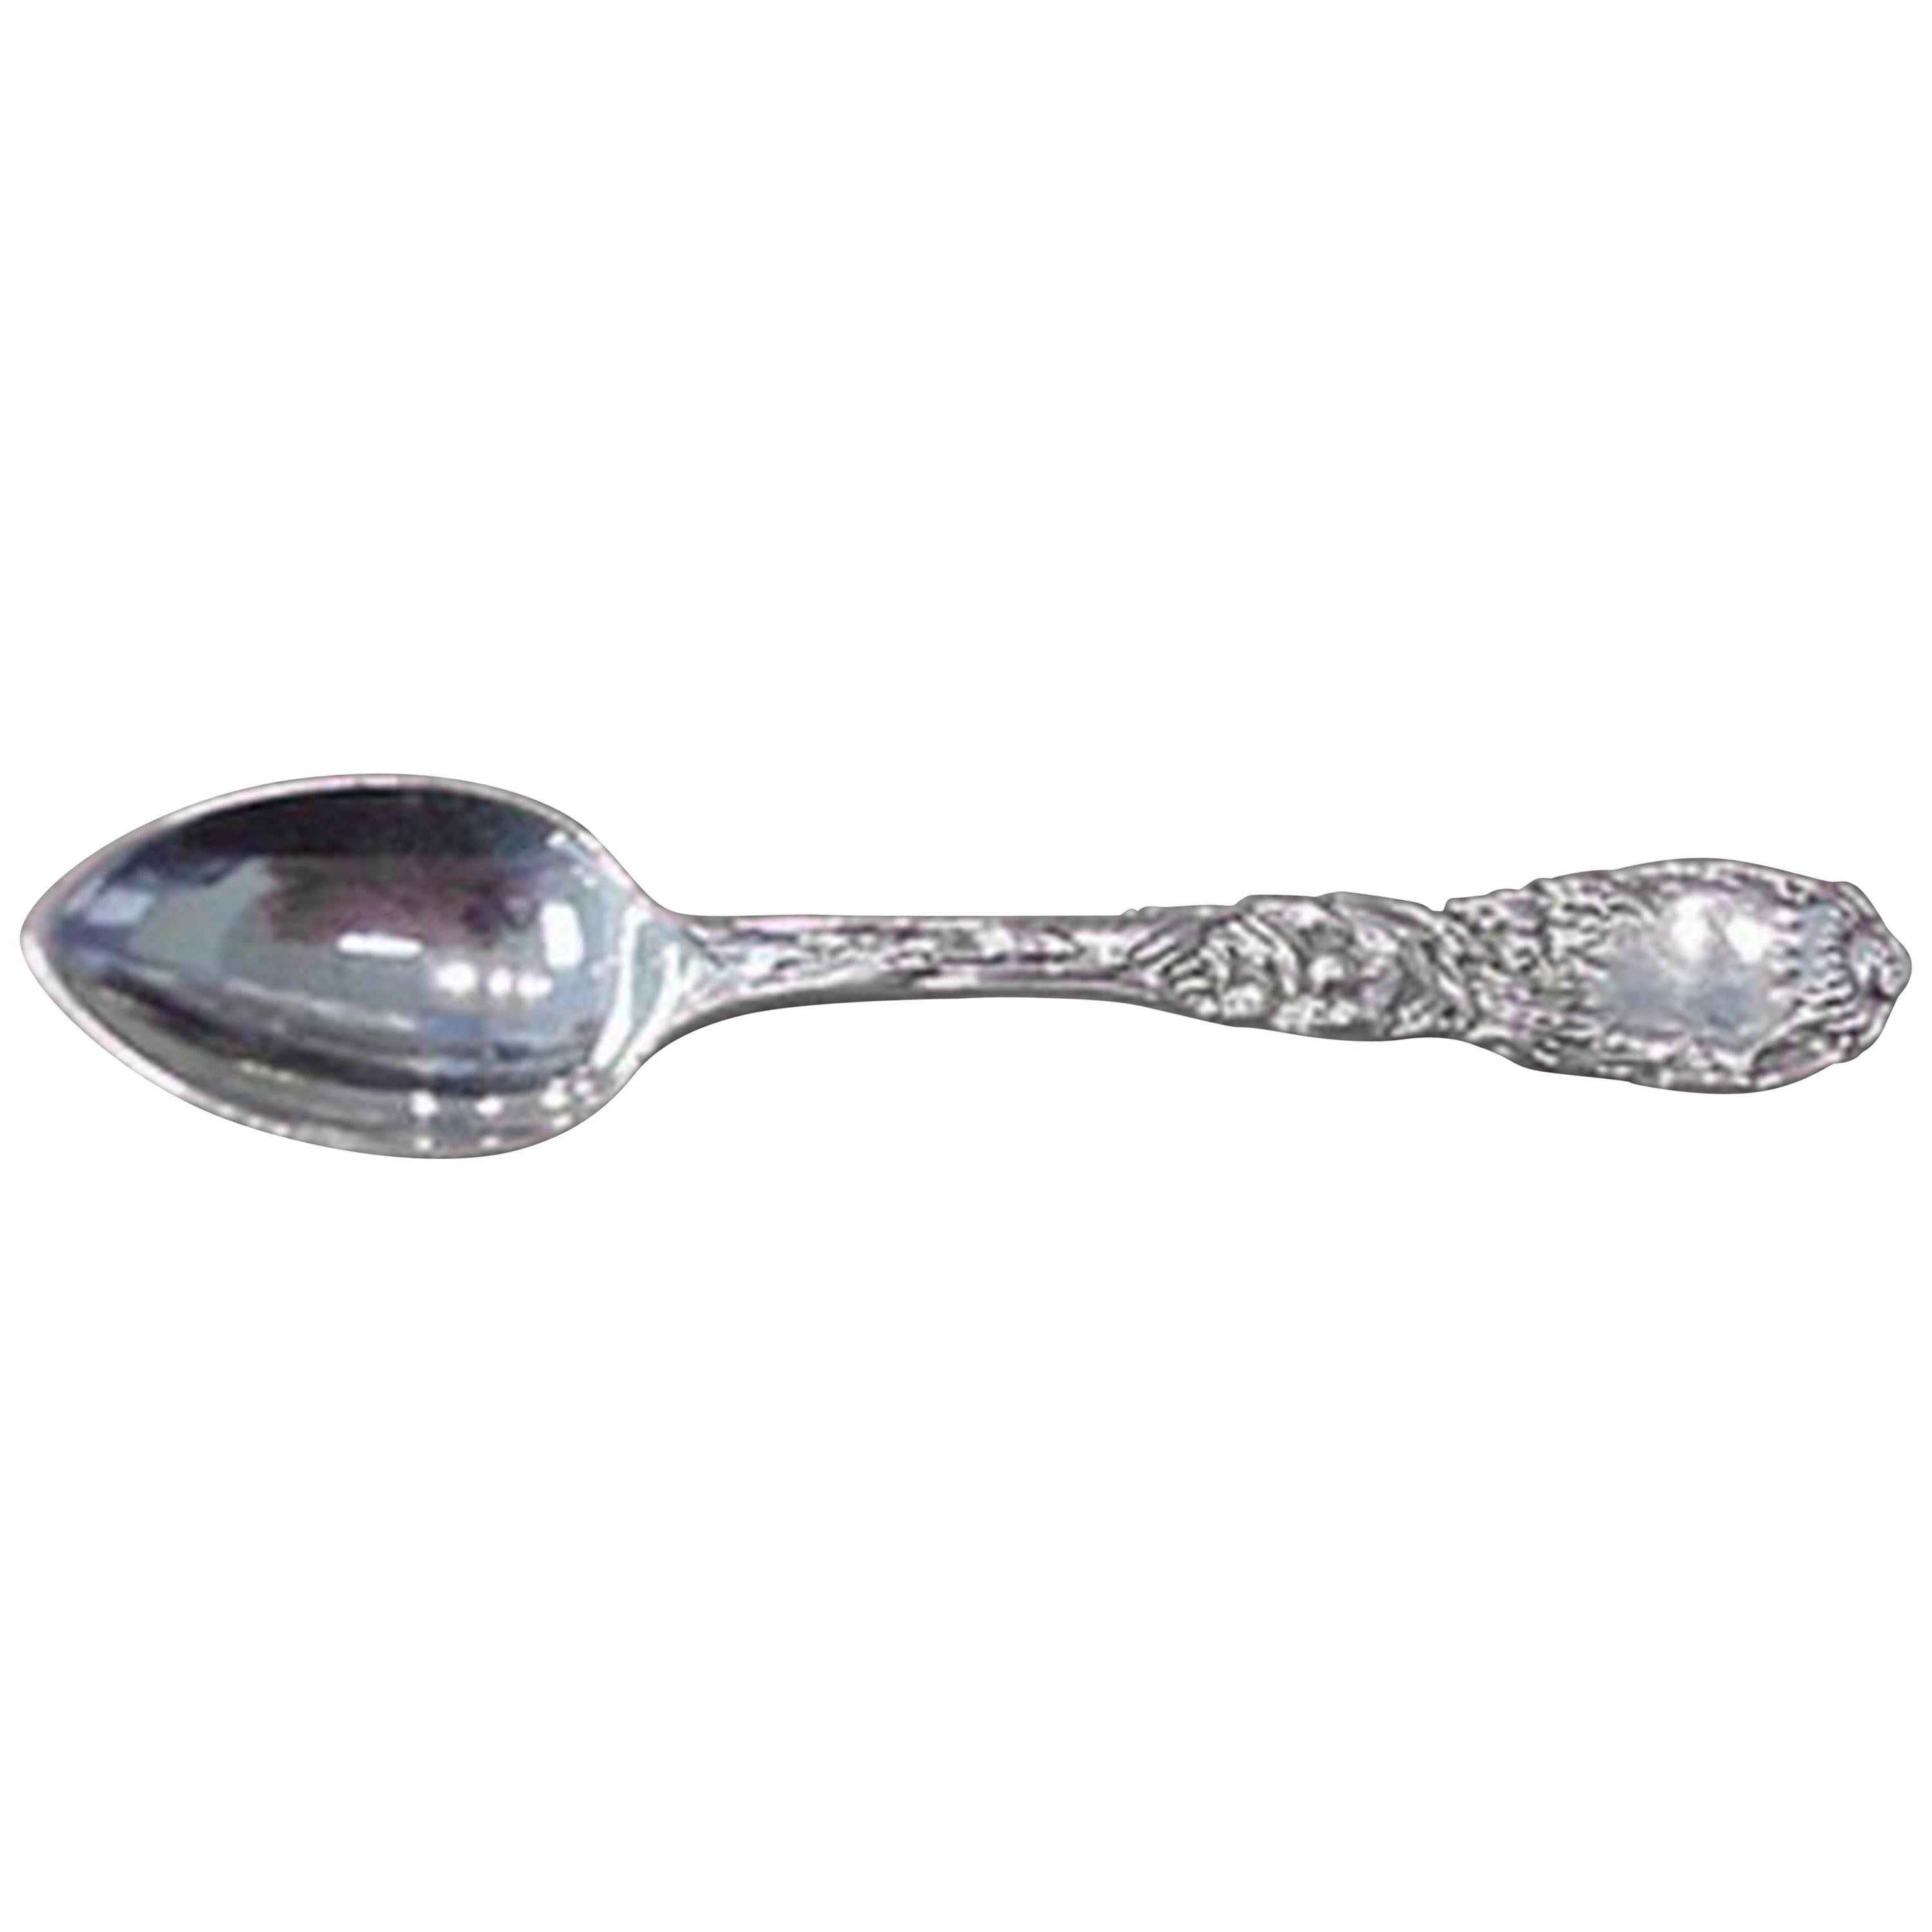 Chrysanthemum by Tiffany and Co Sterling Silver Demitasse Spoon 4"